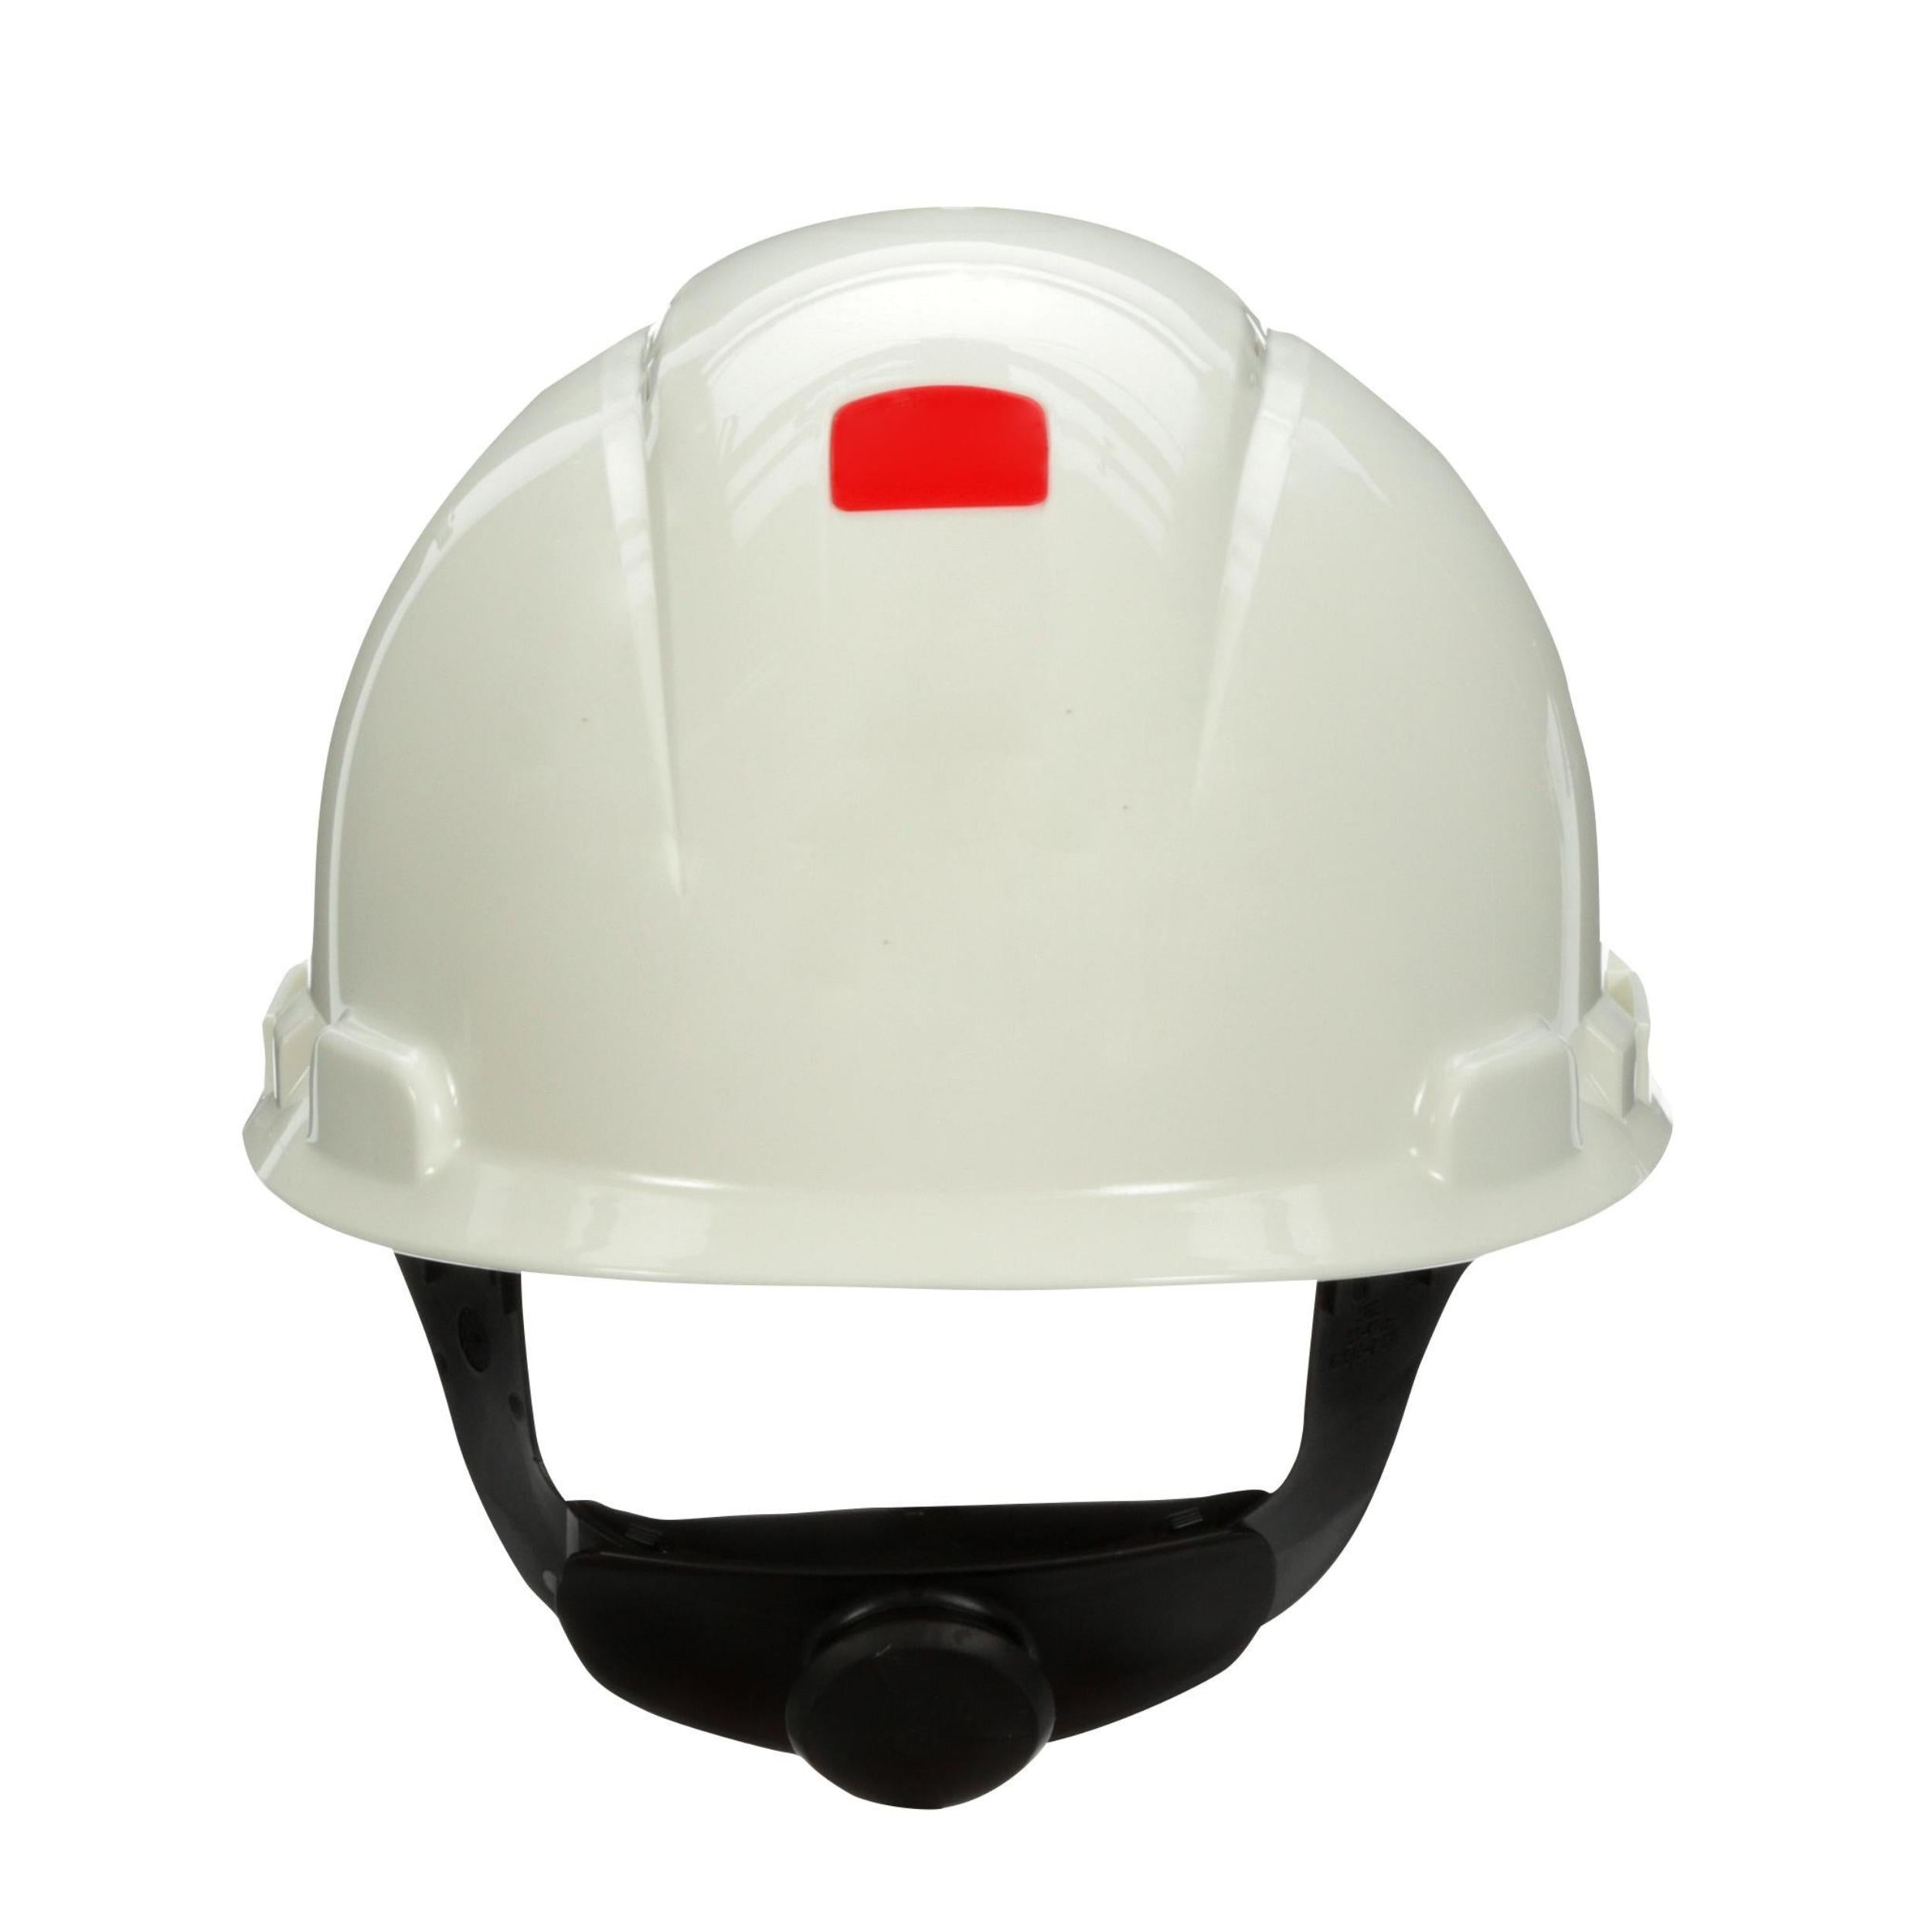 3M™ SecureFit™ Hard Hat H-701SFR-UV, White, 4-Point Pressure Diffusion Ratchet Suspension, with Uvicator